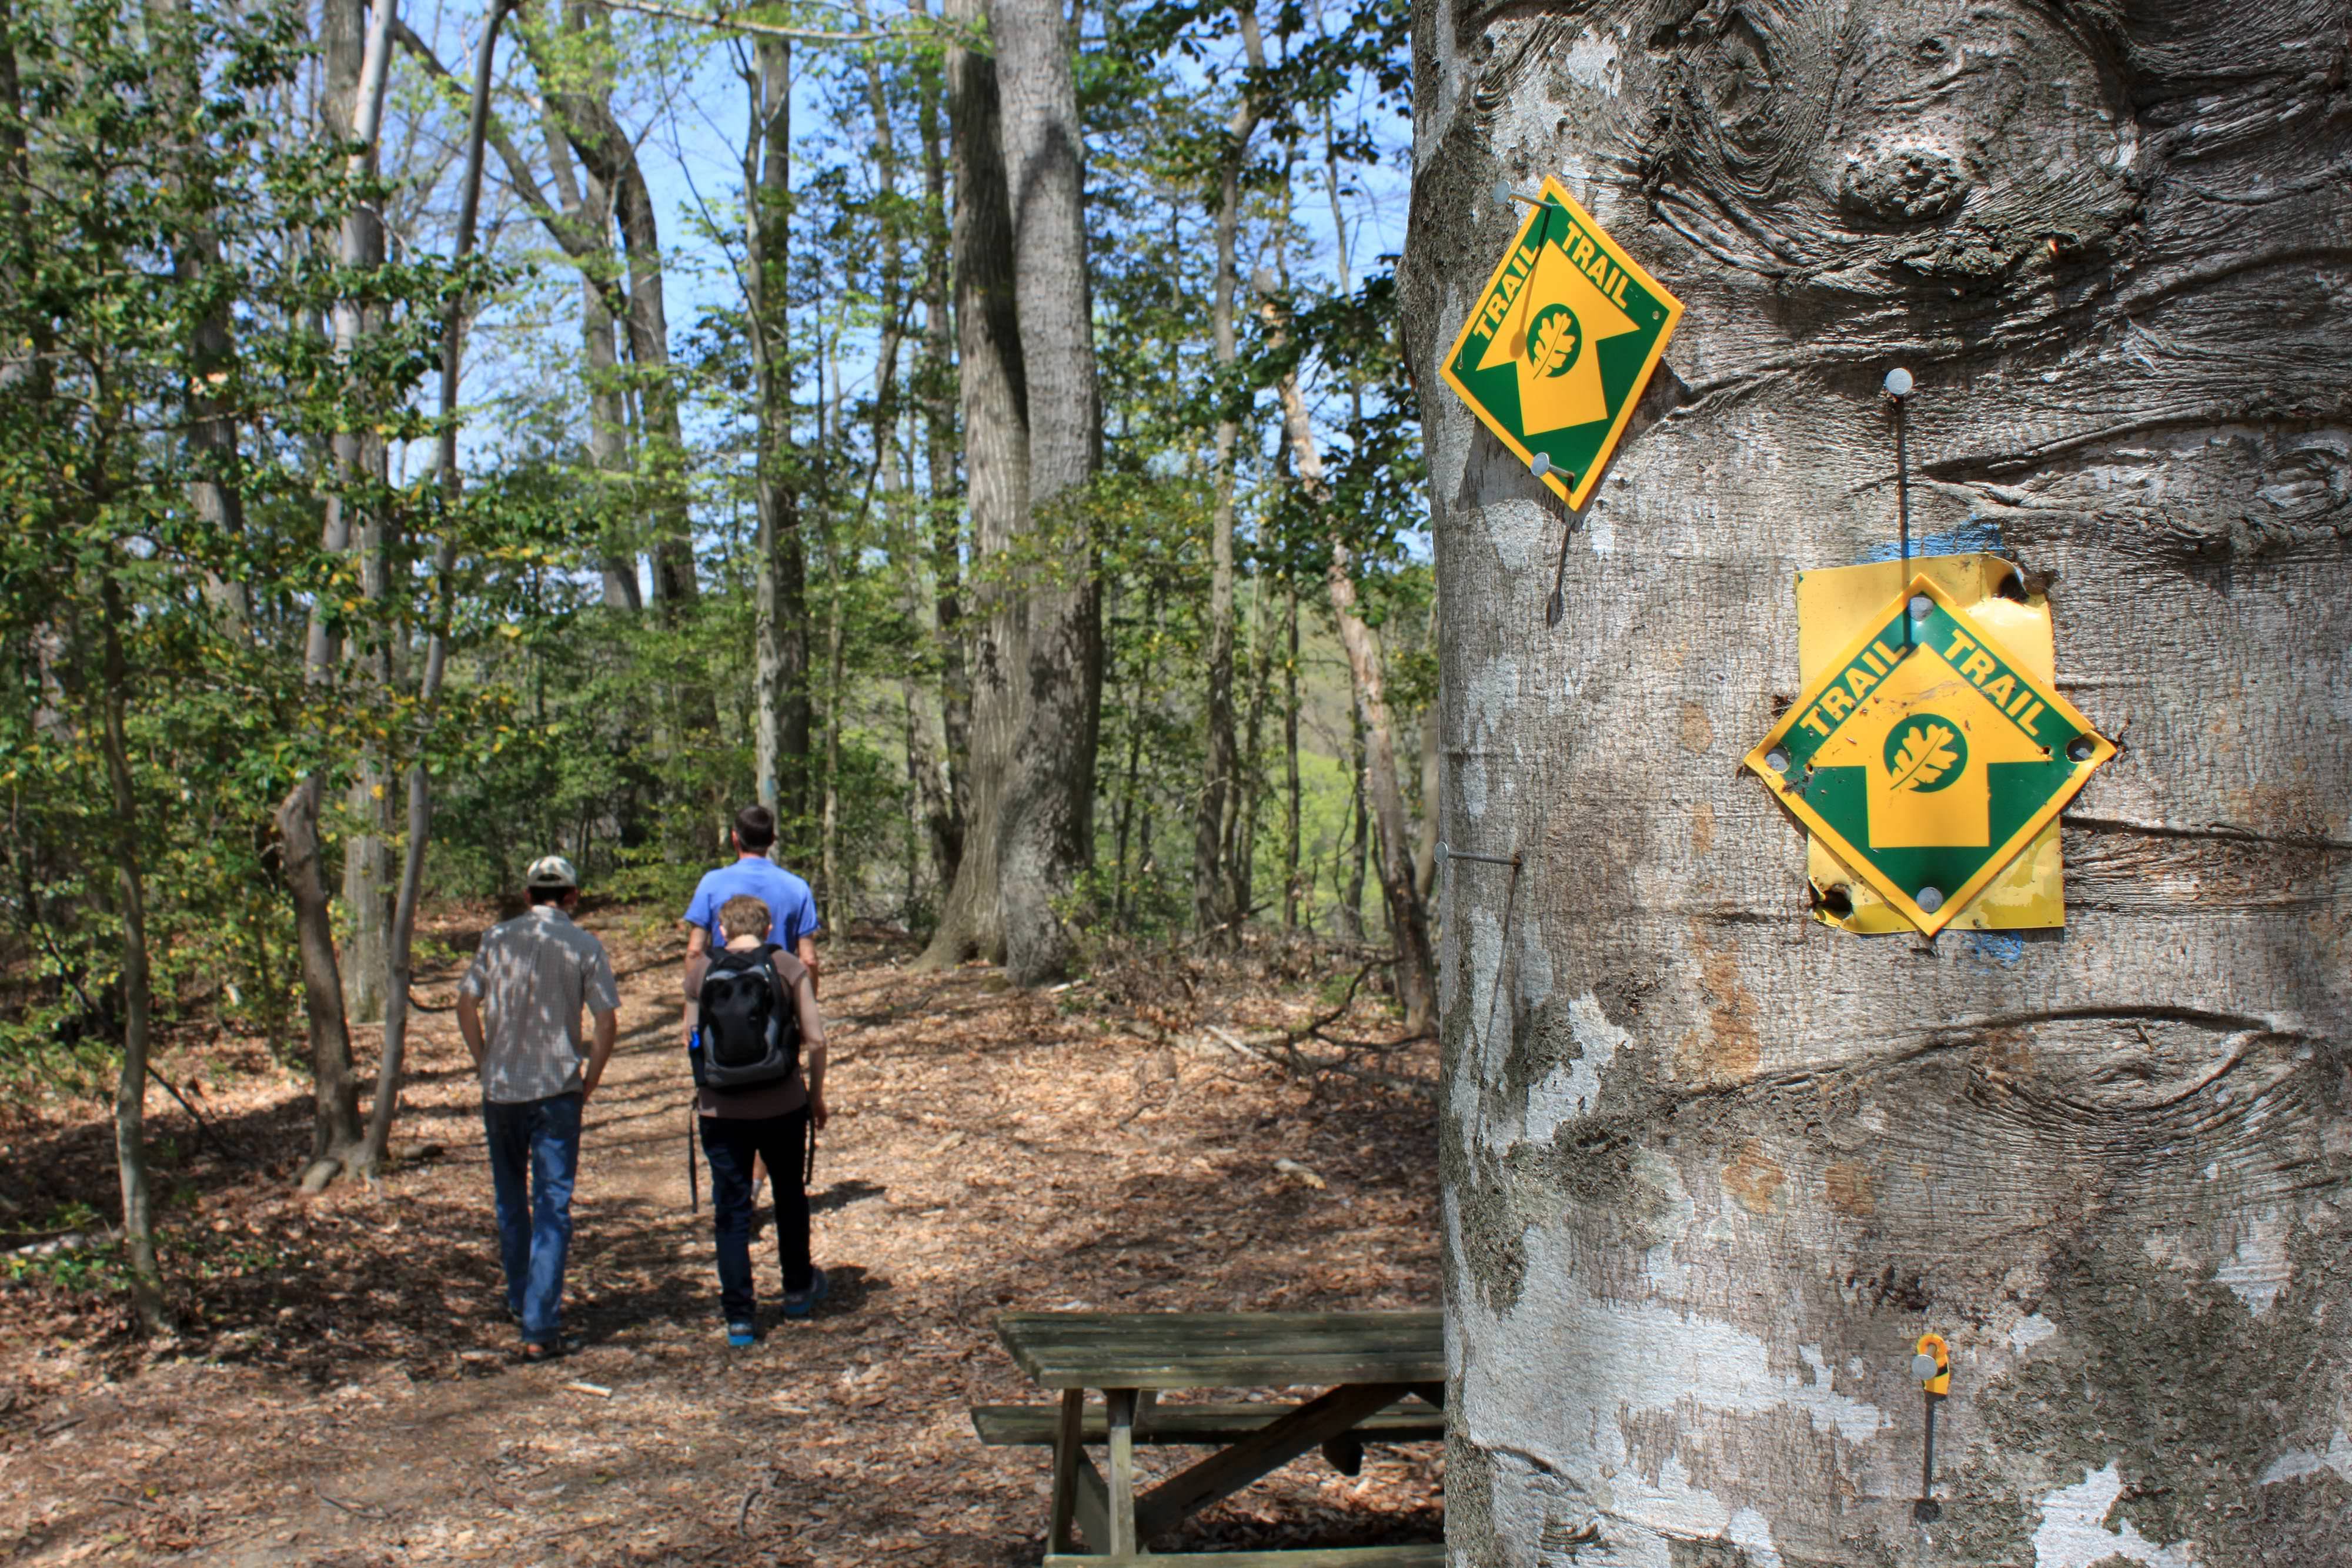 Three people walk past a picnic table following a leaf covered path into a thick green forest. A yellow and green trail blaze sign nailed to a tree marks the way forward.